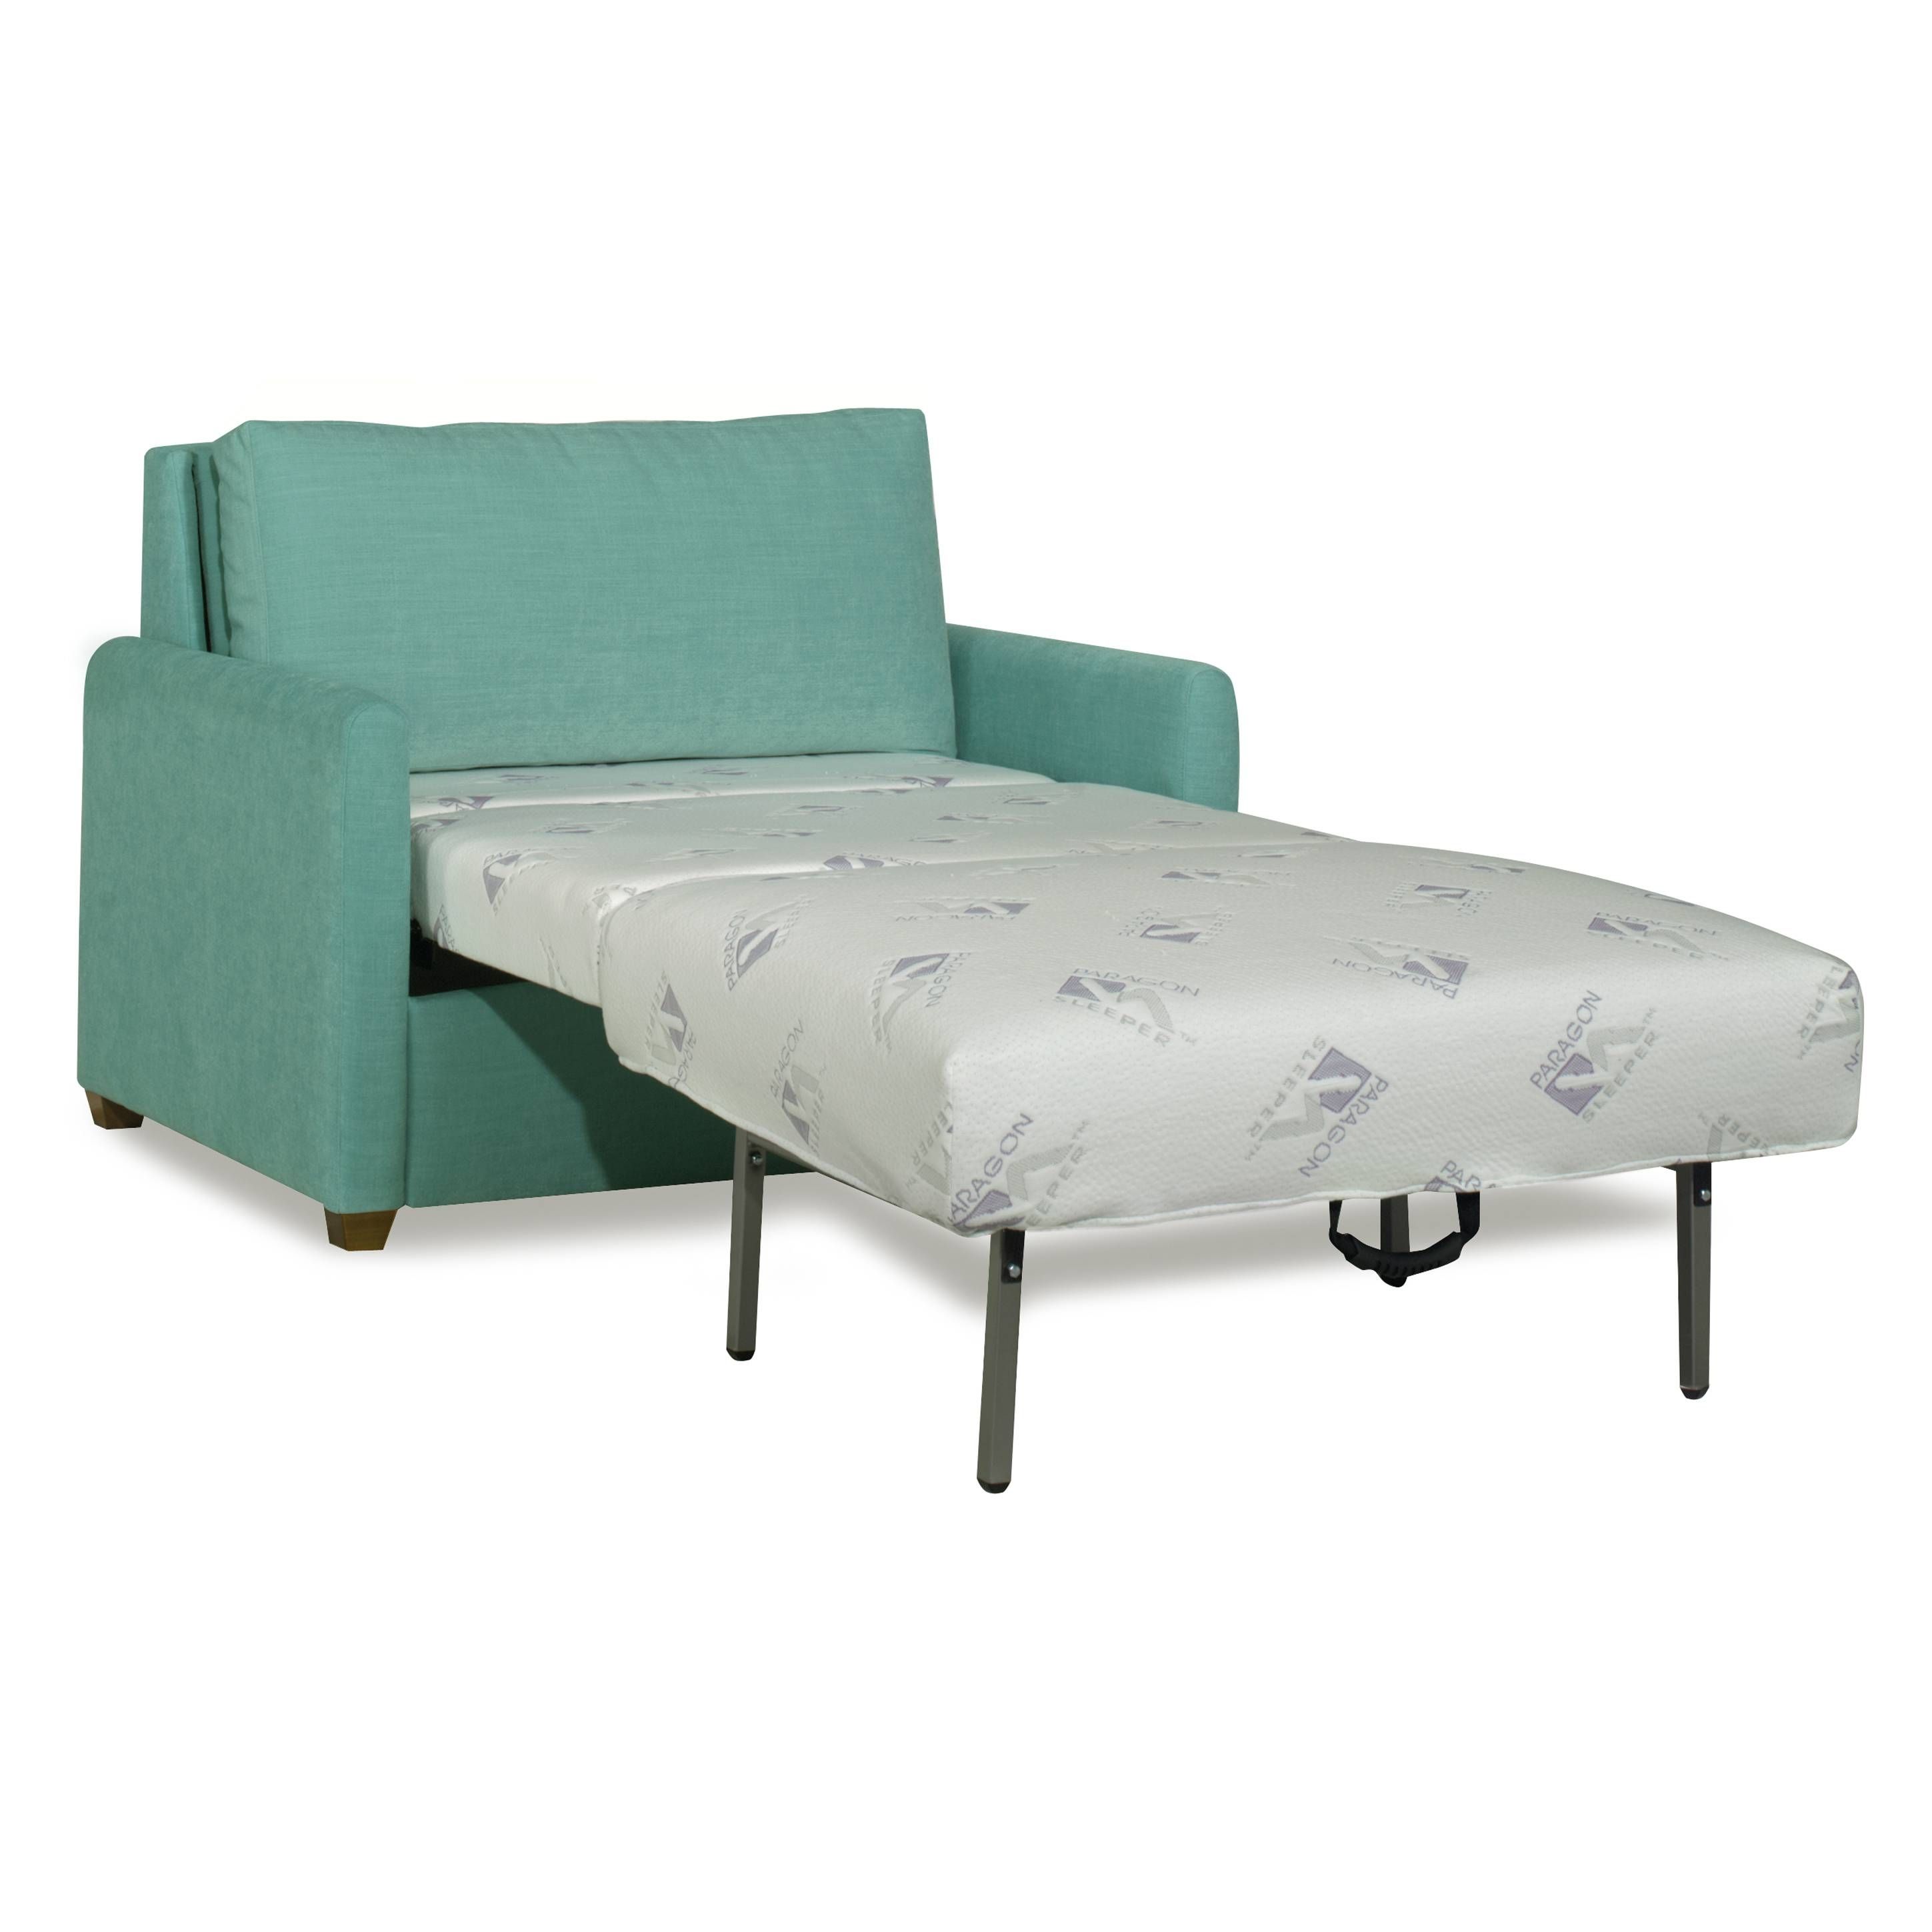 Sofas Center : Twin Sofa Sleeper Chairstwin Chairs Salechair Size With Regard To Twin Sofa Chairs (View 5 of 30)